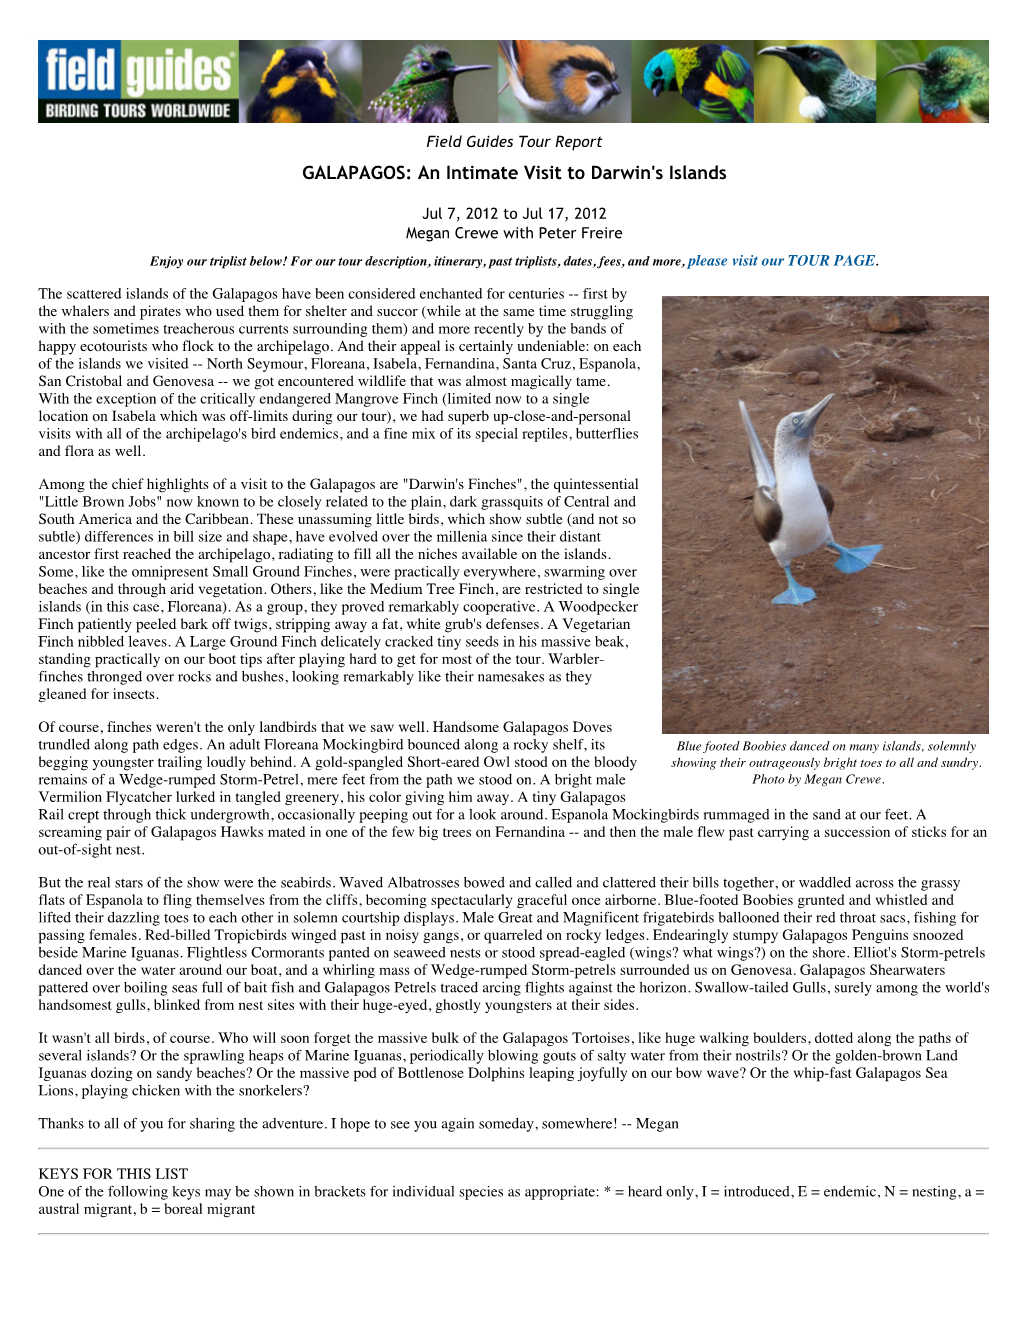 FIELD GUIDES BIRDING TOURS: GALAPAGOS: an Intimate Visit To